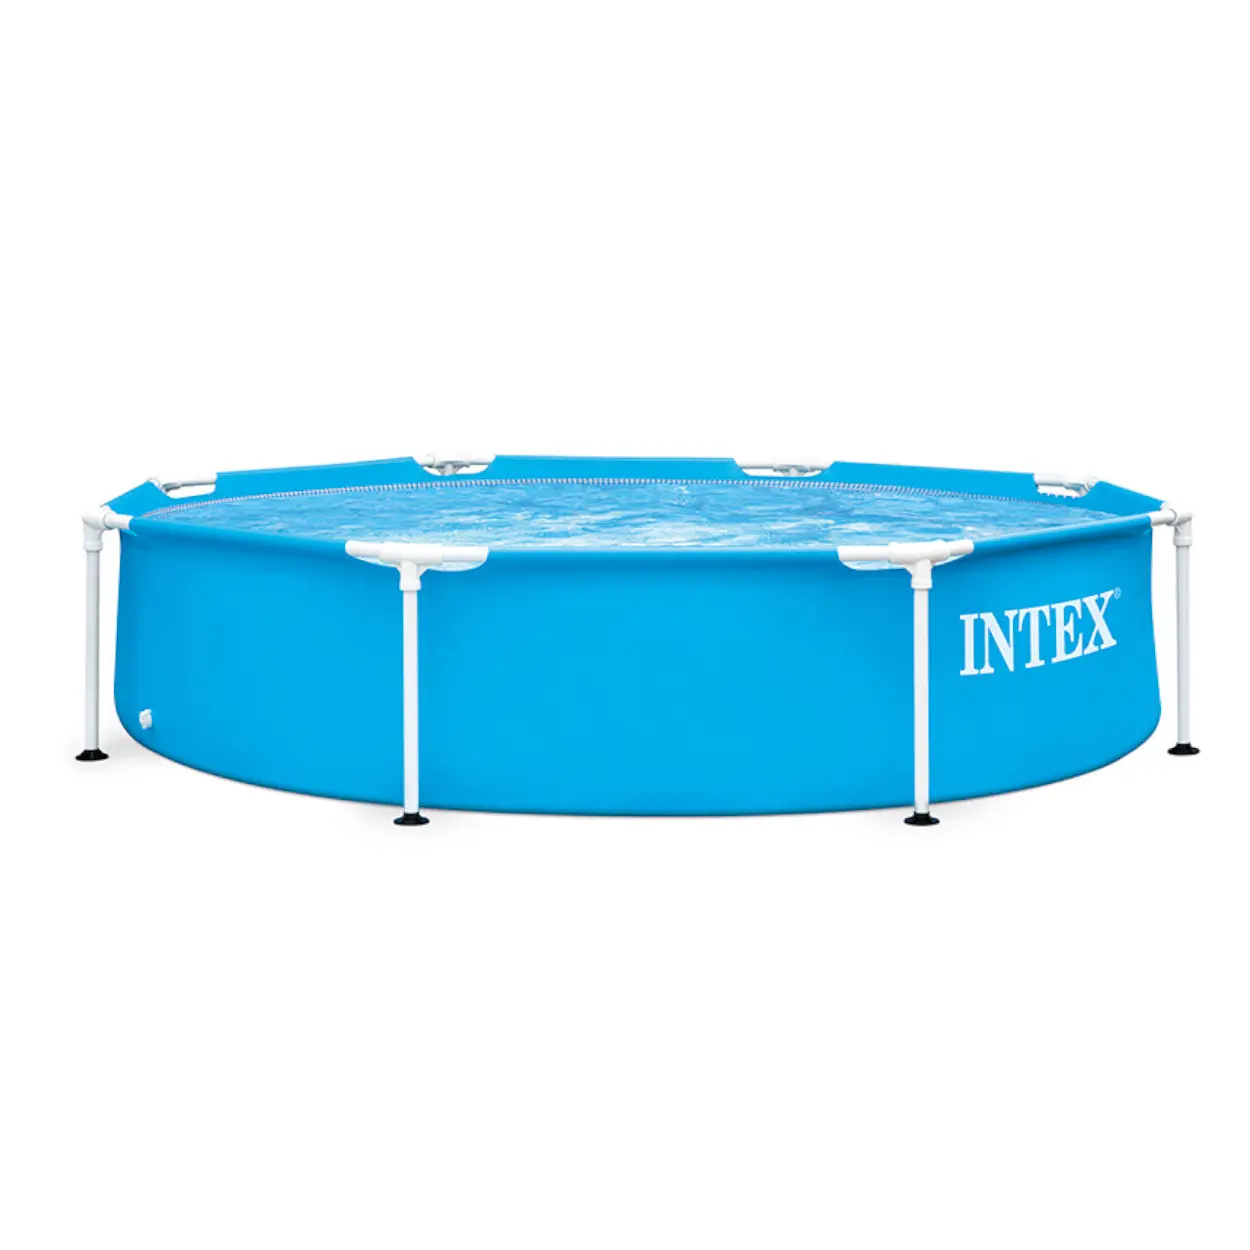 Best quality above ground round pool Intex 28205 Metal Frame Cm 244x51 for children outdoor rubber pools swimming water fun